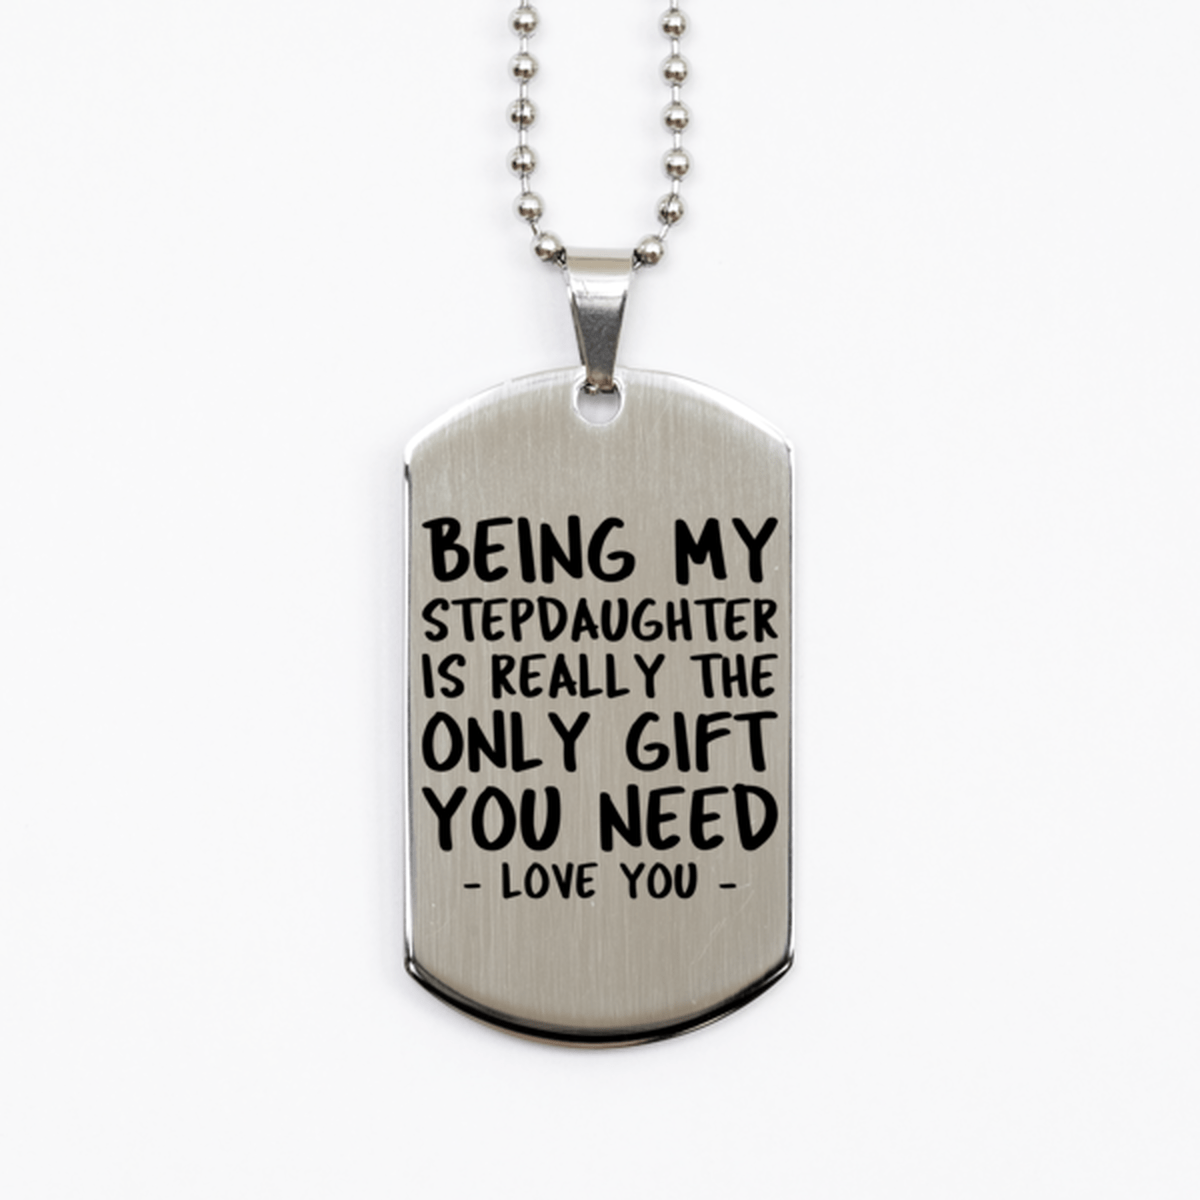 Funny Stepdaughter Silver Dog Tag Necklace, Being My Stepdaughter Is Really the Only Gift You Need, Best Birthday Gifts for Stepdaughter